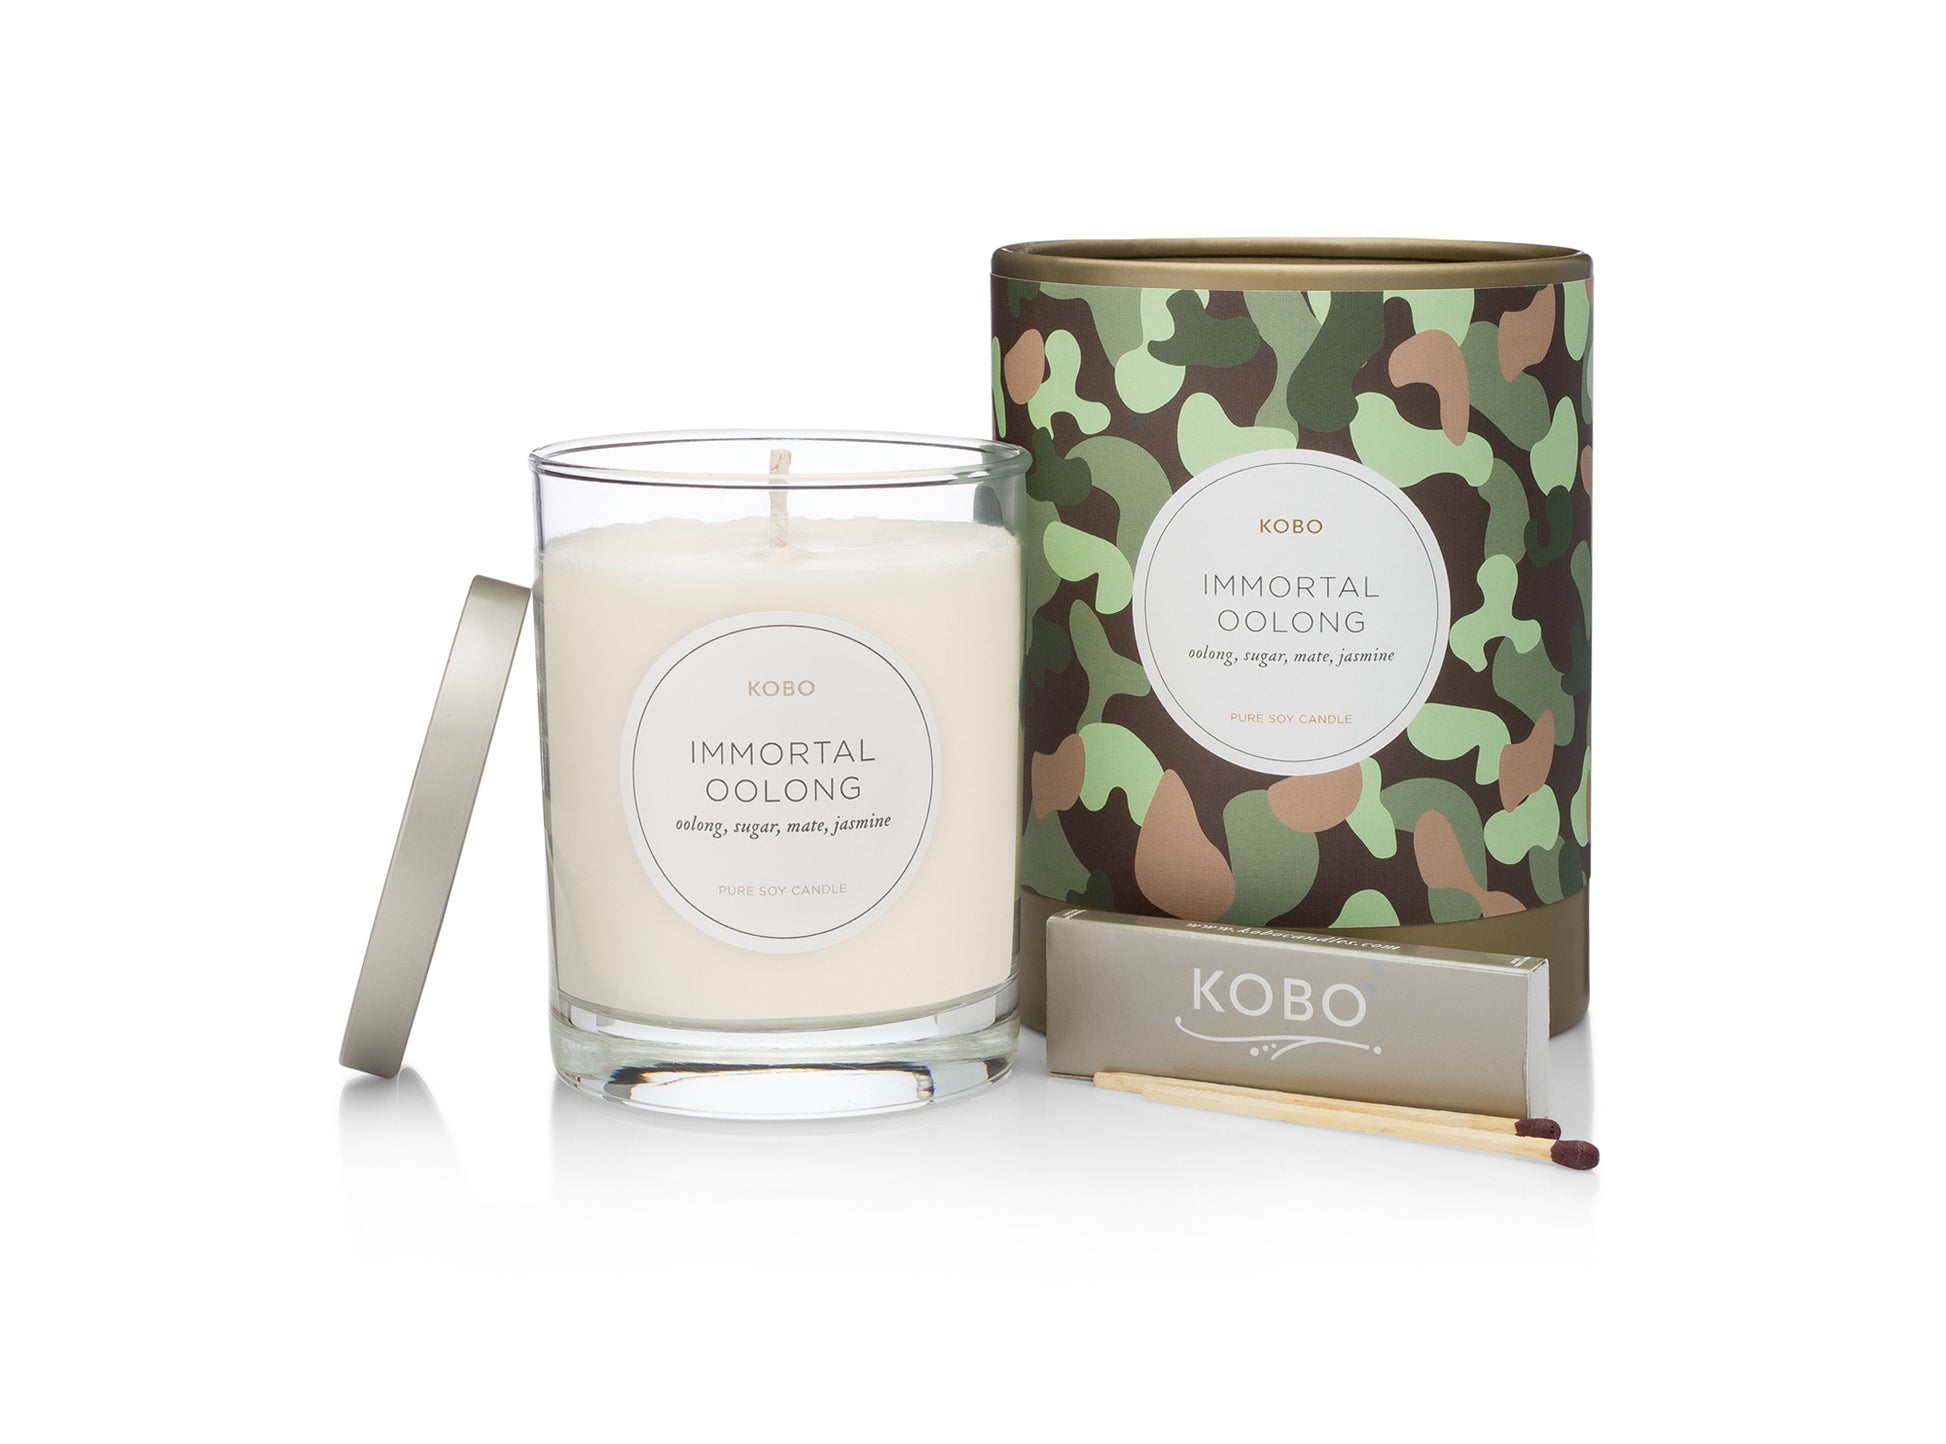 Primary Image of Immortal Oolong Camo 11 oz Pure Soy Candle